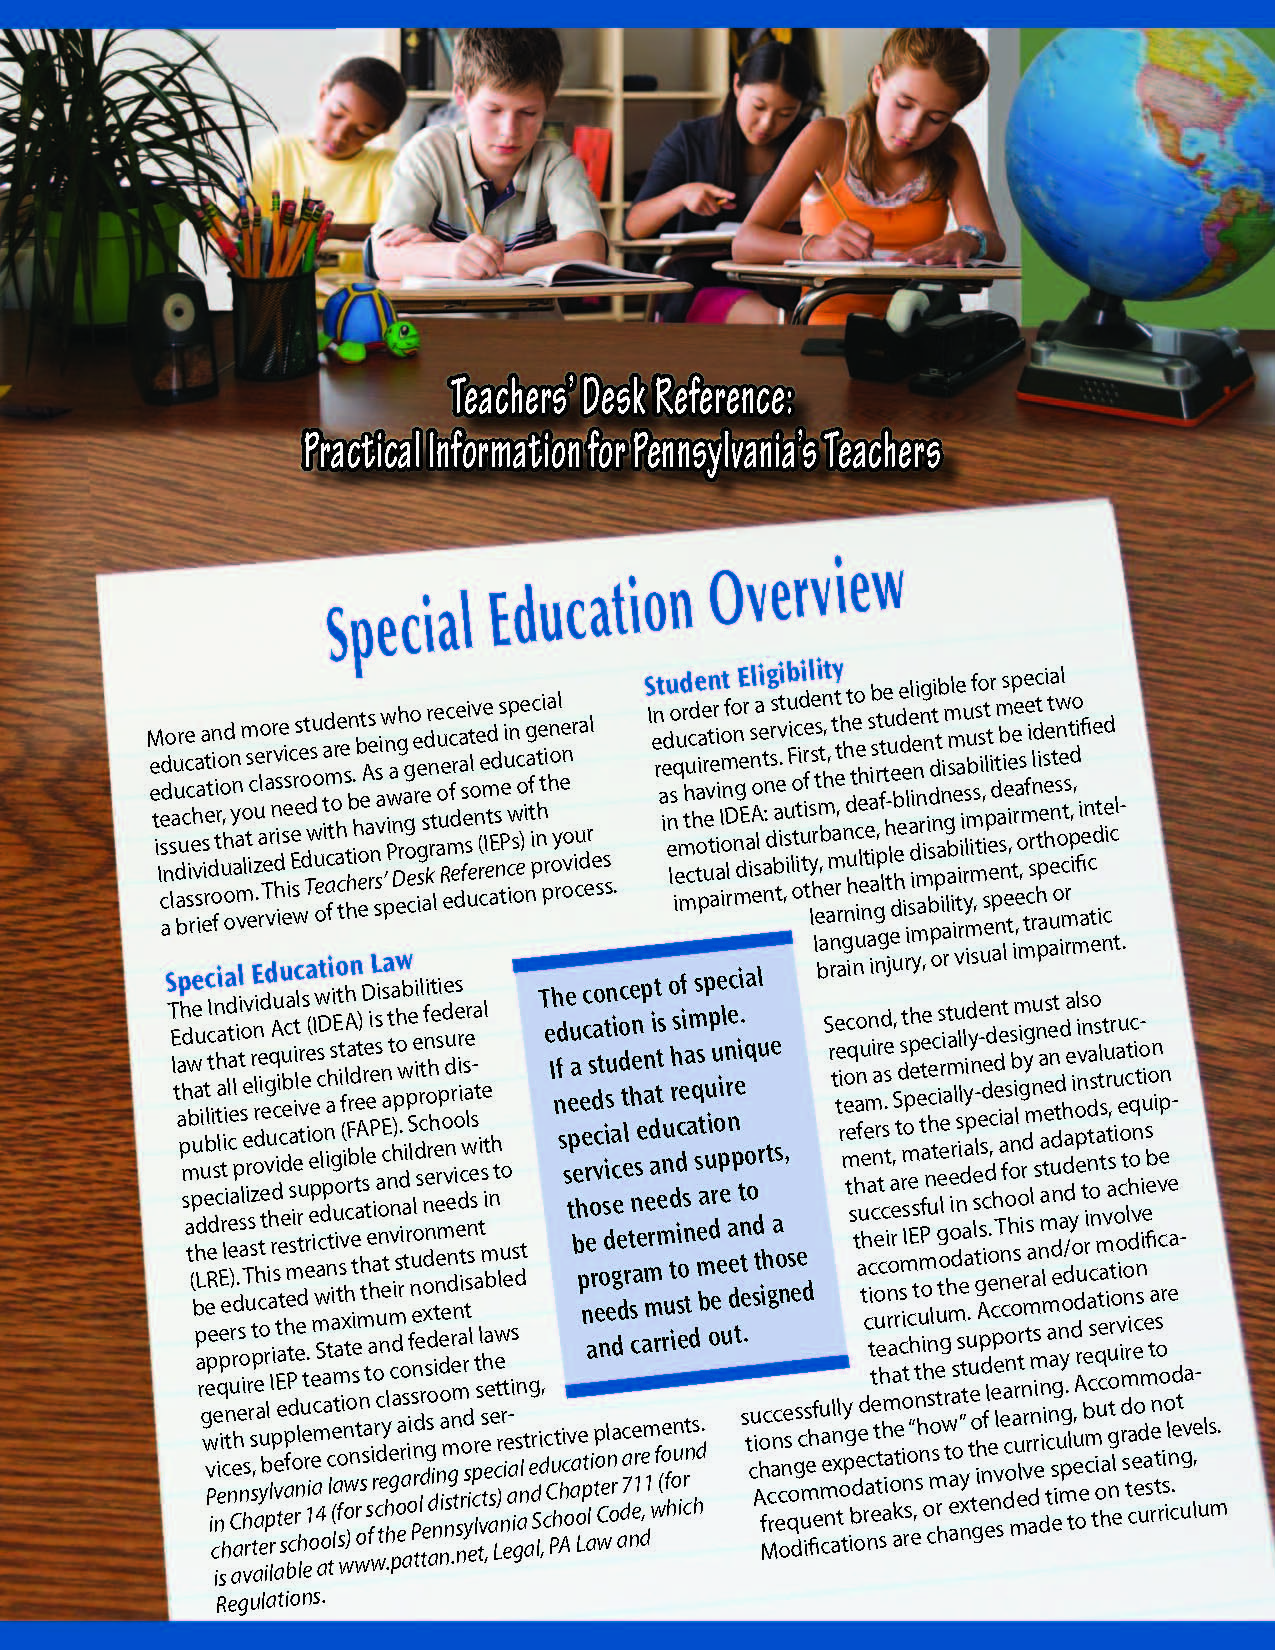 Teachers' Desk Reference: Special Education Overview